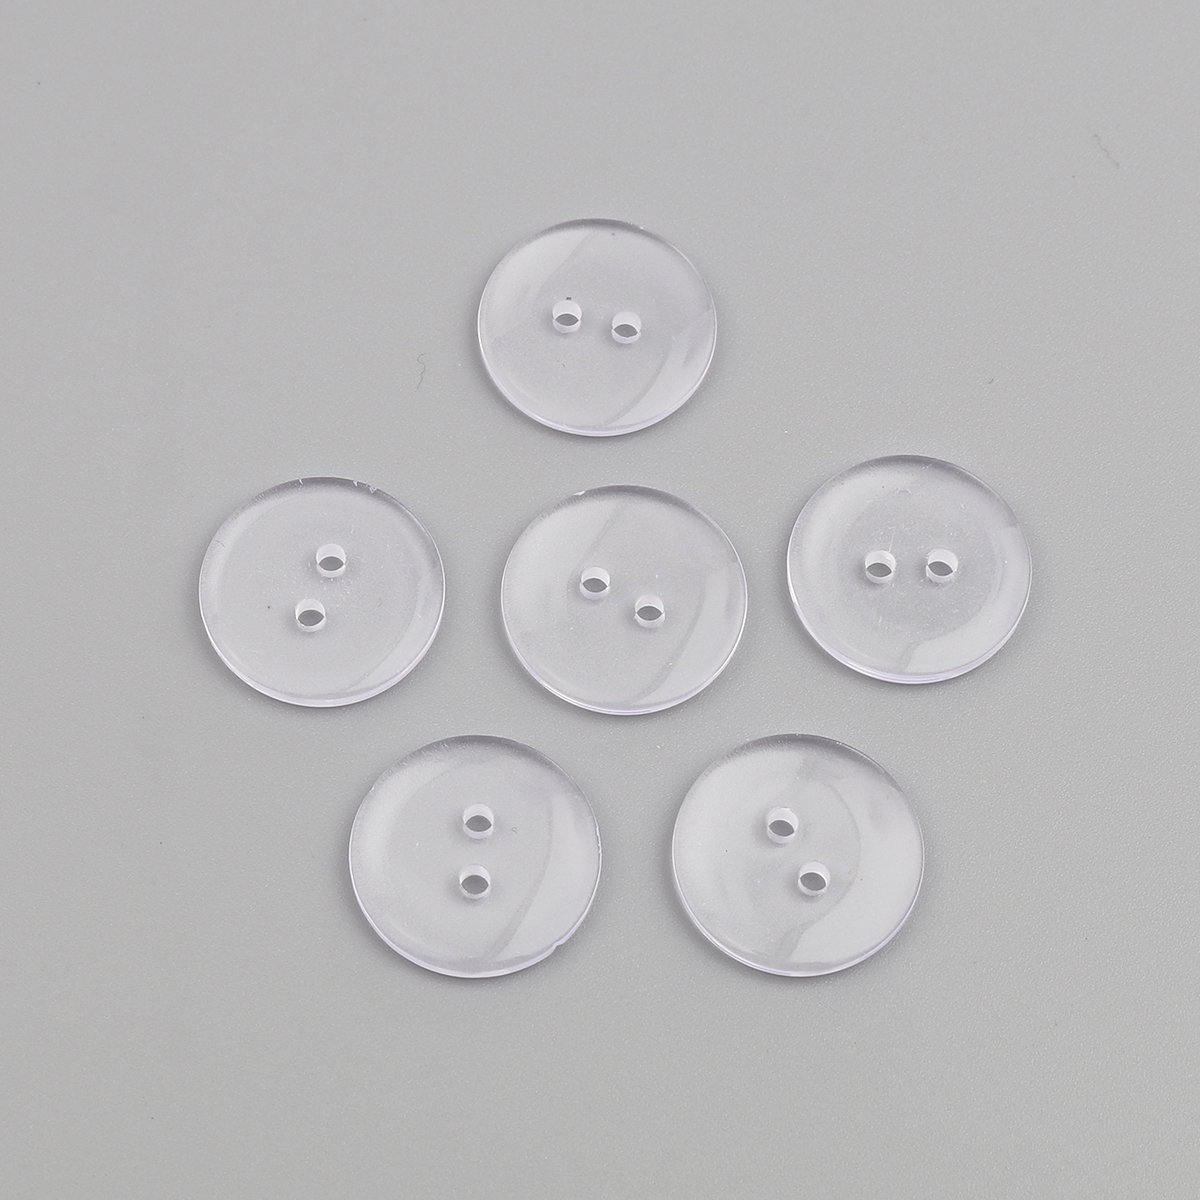  WedDecor 15mm Clear Plastic Round Buttons with 4 Holes